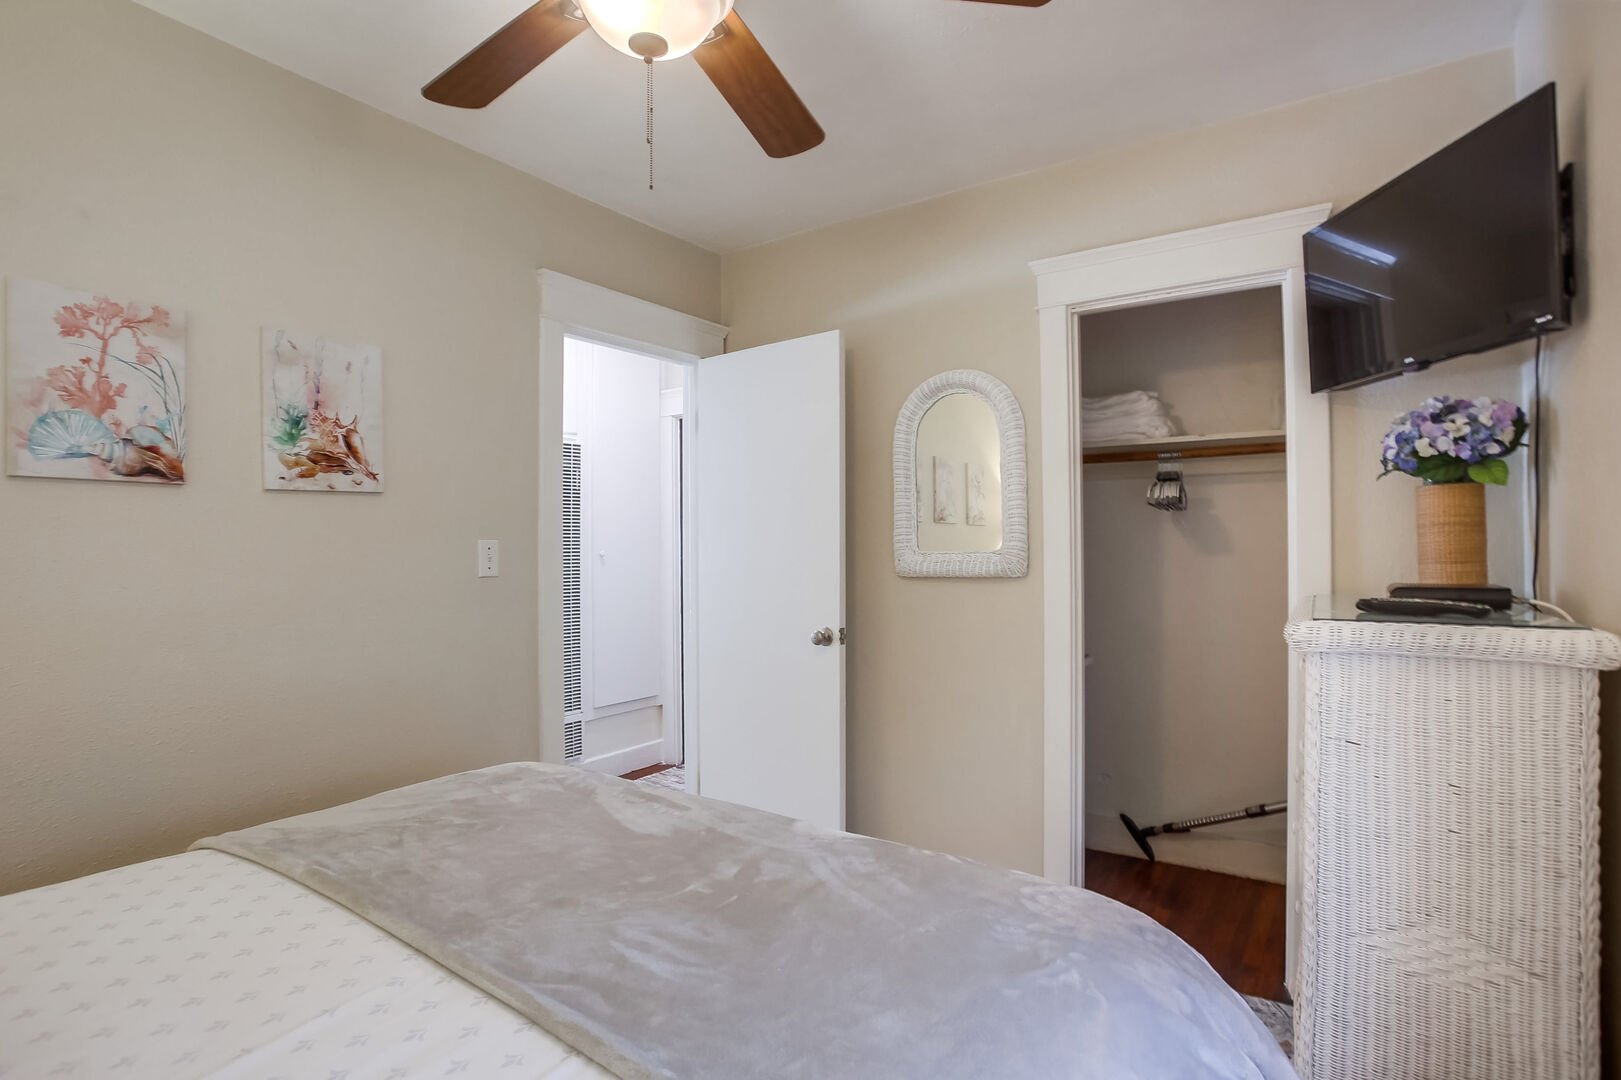 Master bedroom with closet and dresser storage and ceiling fan